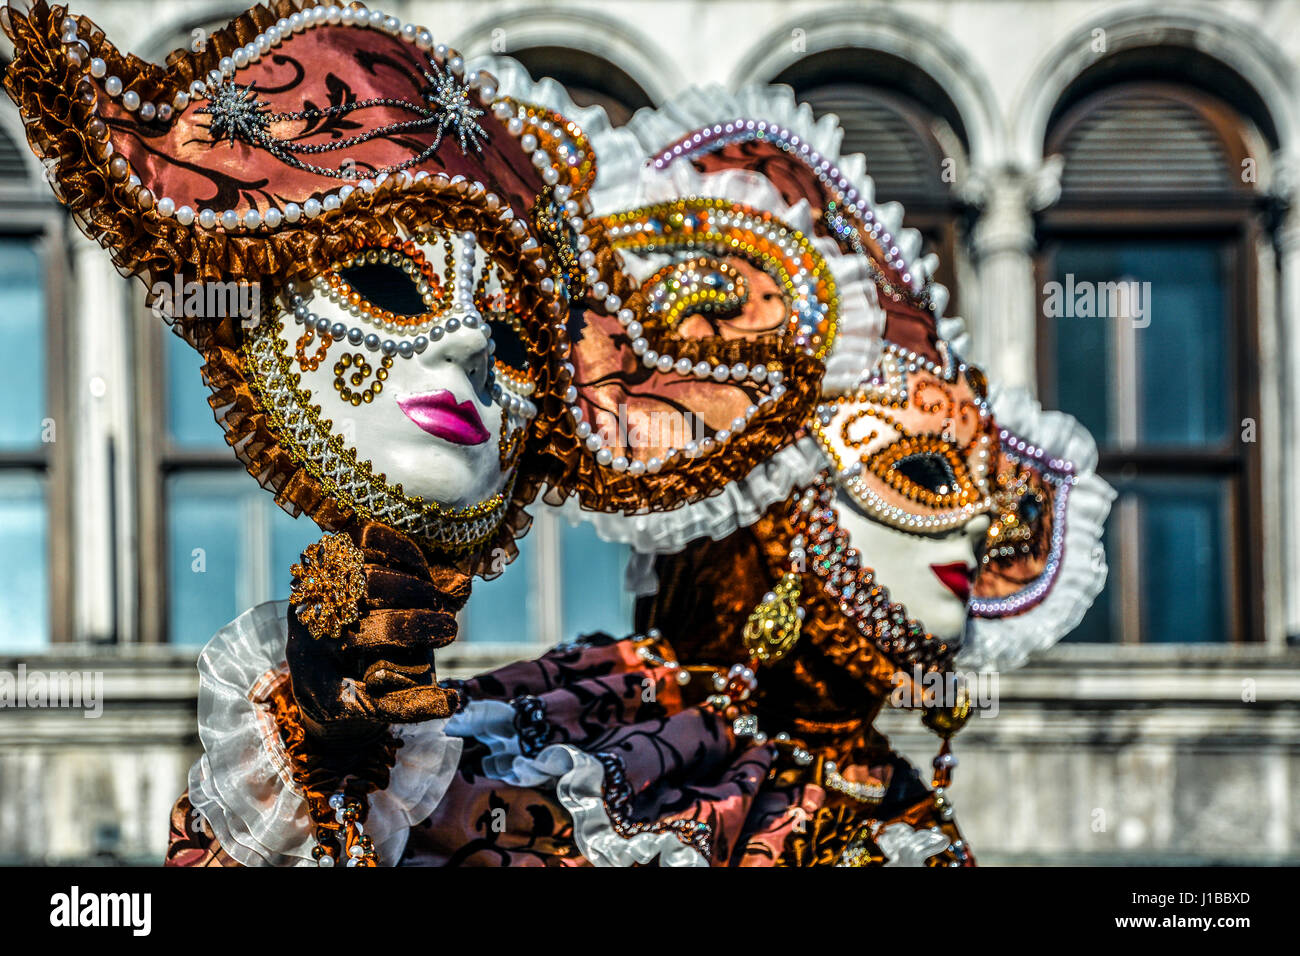 Beautiful young woman in mysterious colors Venetian mask. Fashion photo.  Holidays and celebrations Stock Photo - Alamy